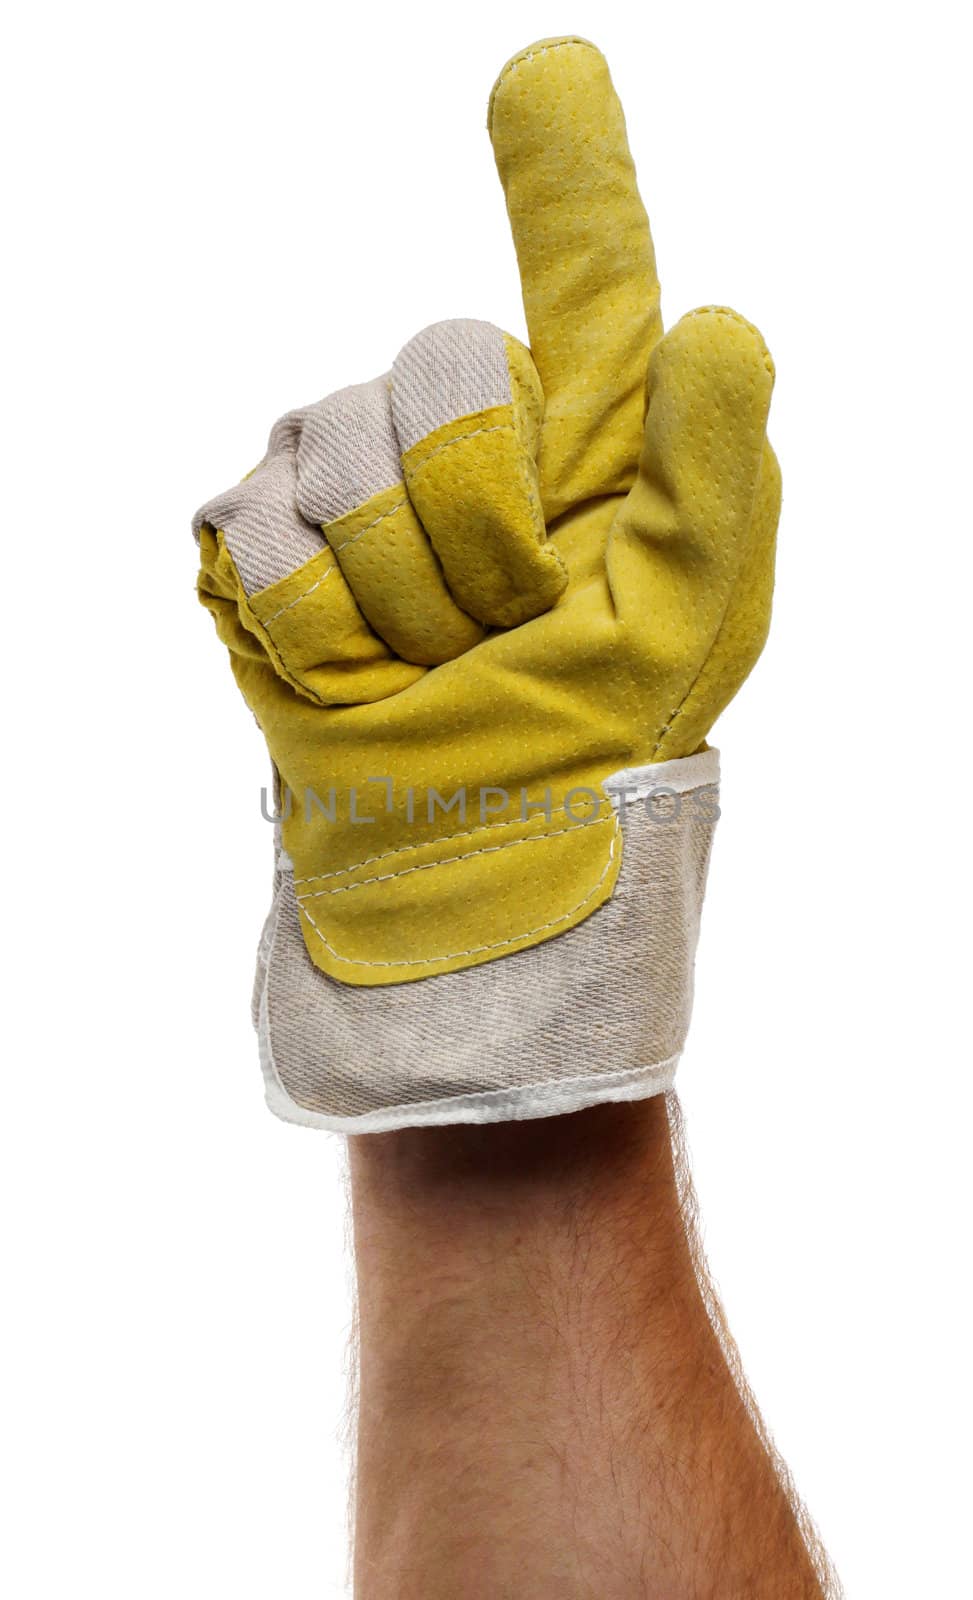 Strong worker hand glove finger pointing up